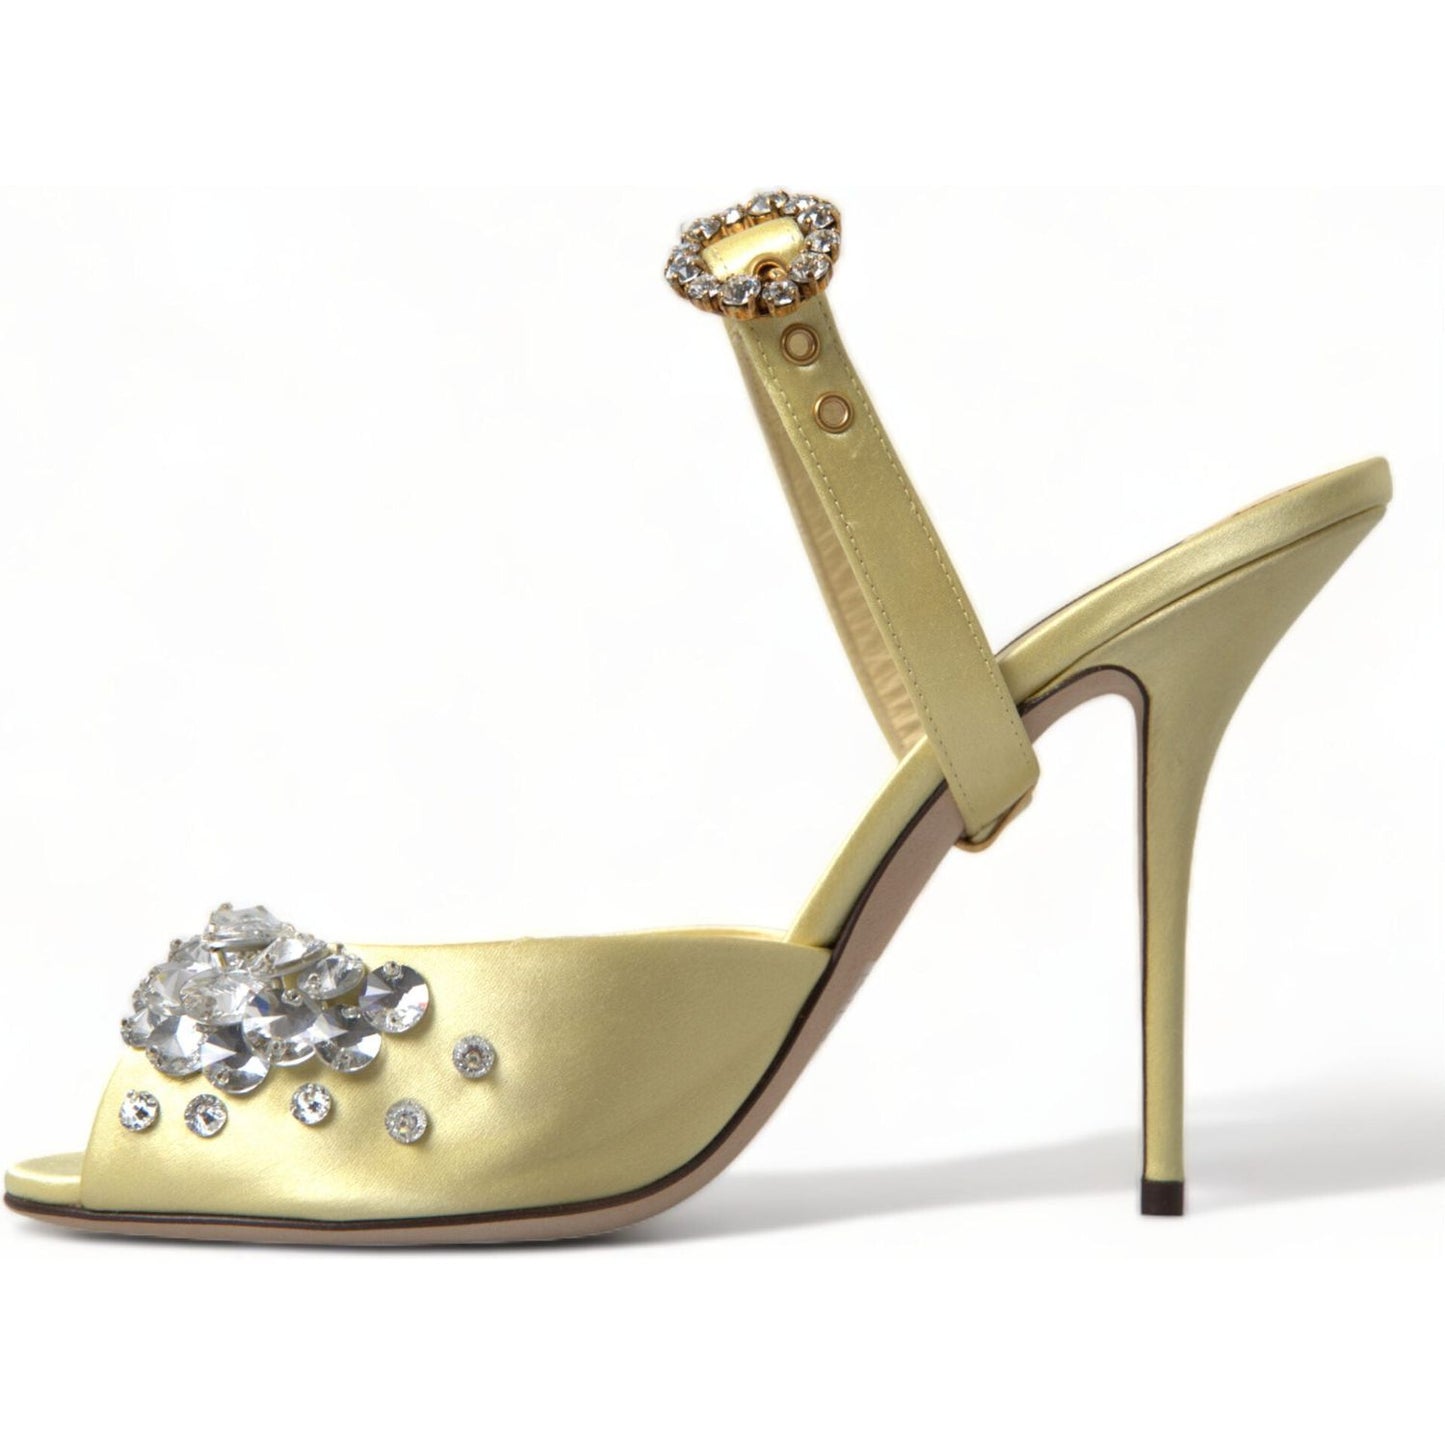 Dolce & Gabbana Crystal Embellished Silk Sandals yellow-satin-crystal-mary-janes-sandals